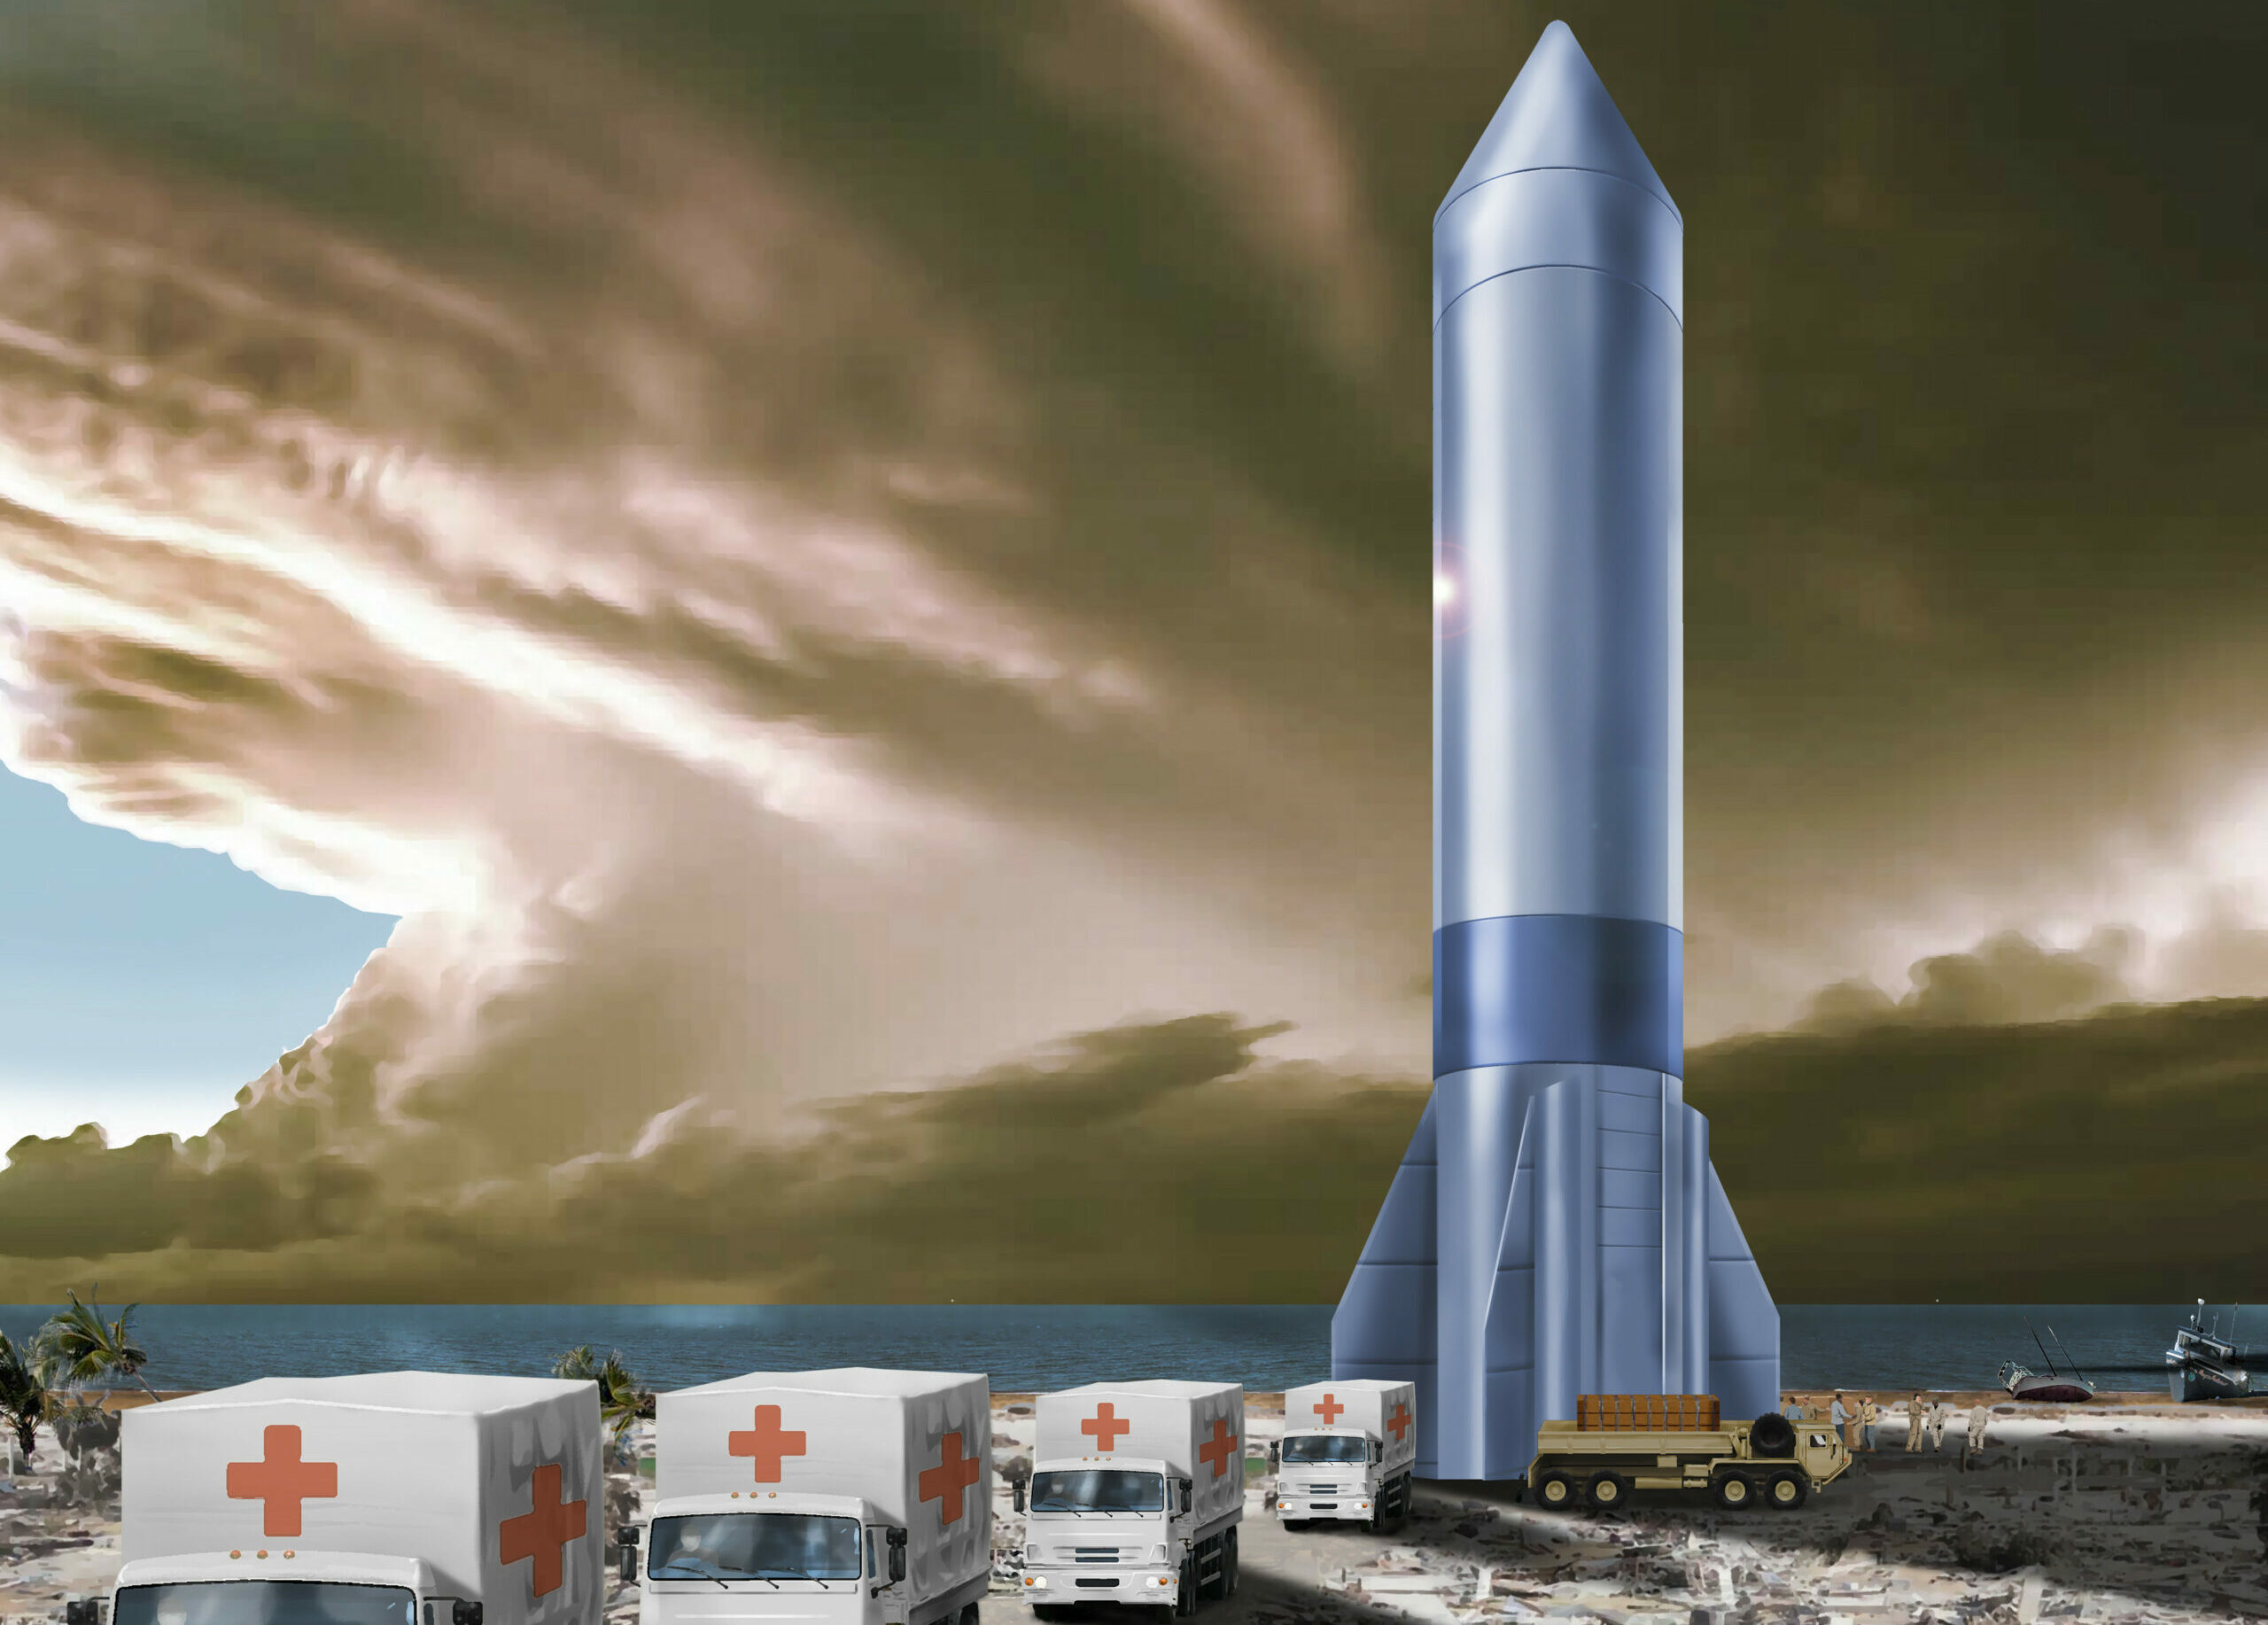 A graphic depicting Rocket Cargo, one of the Department of Air Force Vanguard programs that focuses on rapid global mobility including delivery of medical supplies